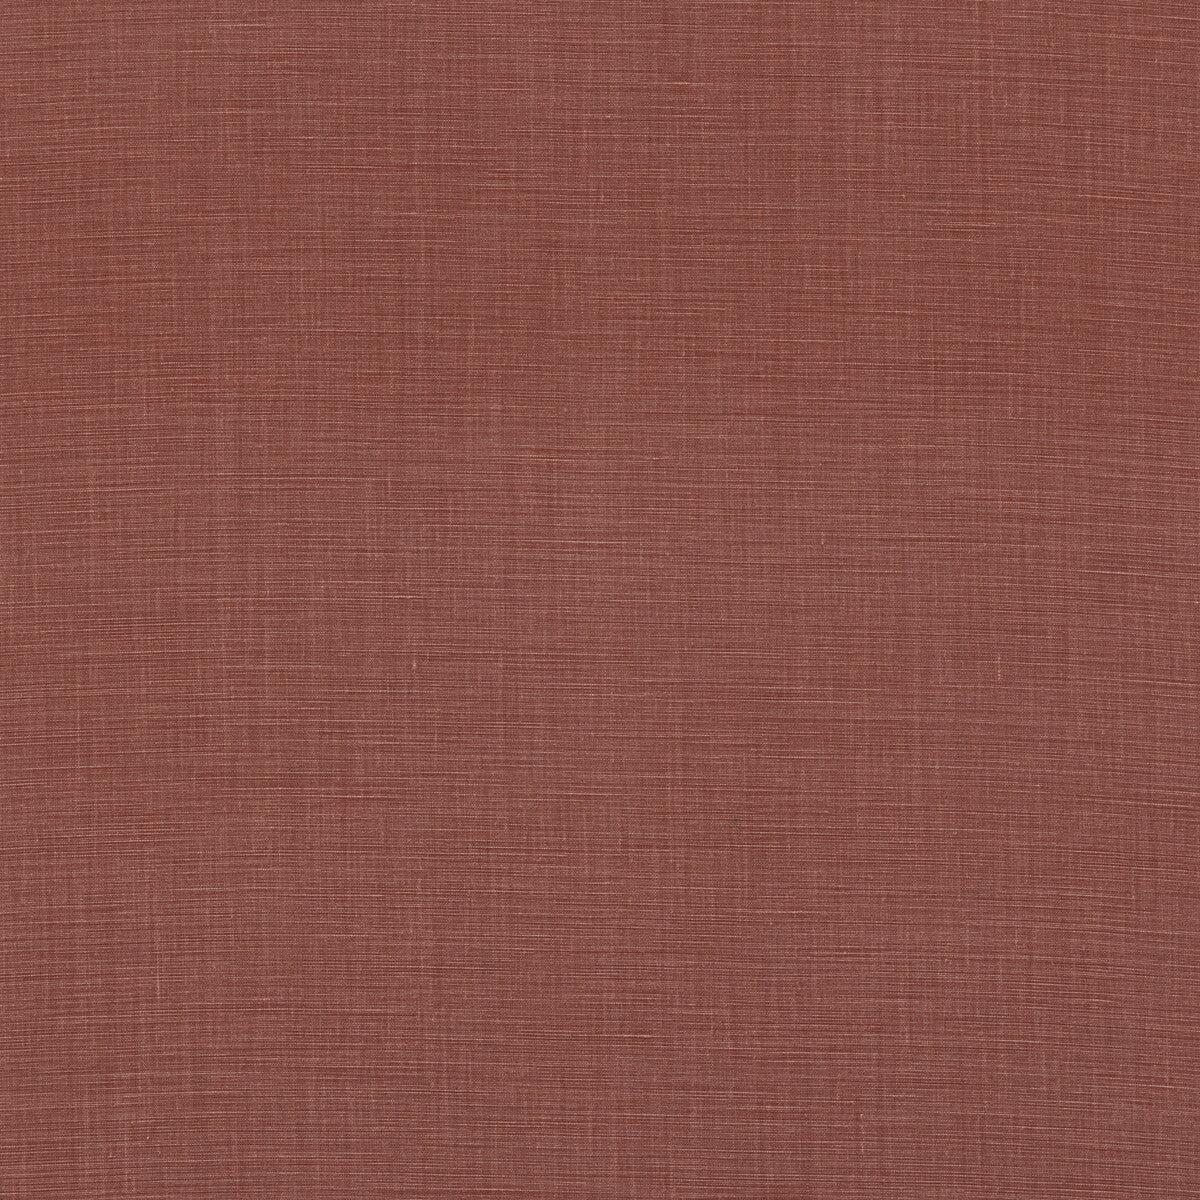 Baker House Linen fabric in tuscan color - pattern BF10961.320.0 - by G P &amp; J Baker in the Baker House Linens collection